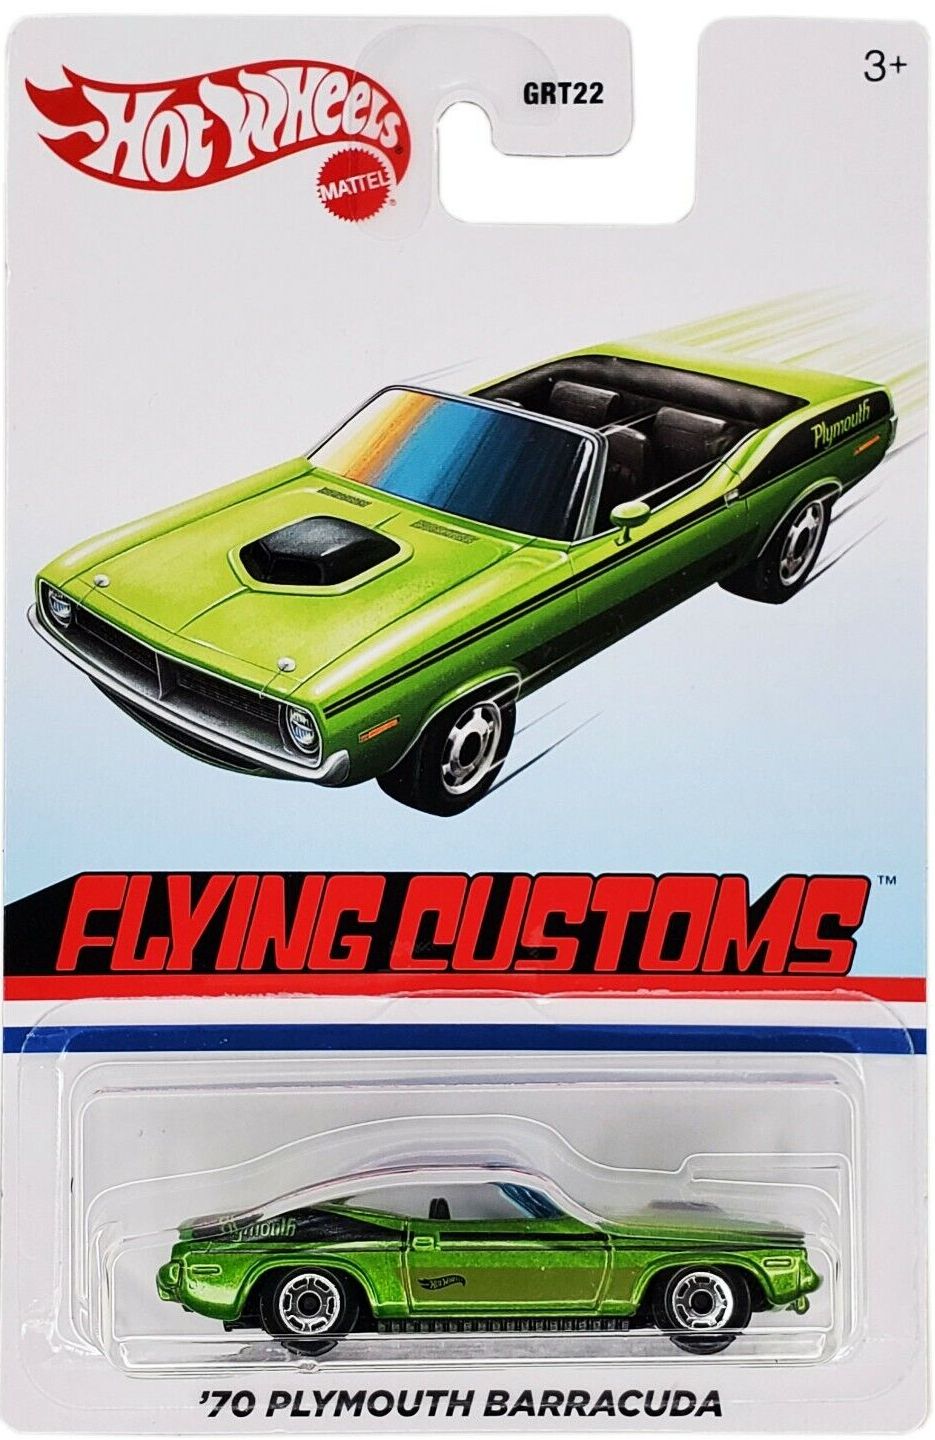 2021 Flying Customs Mix 2 70 Plymouth Barracuda Hot Wheels The Eugenebookstore 7373